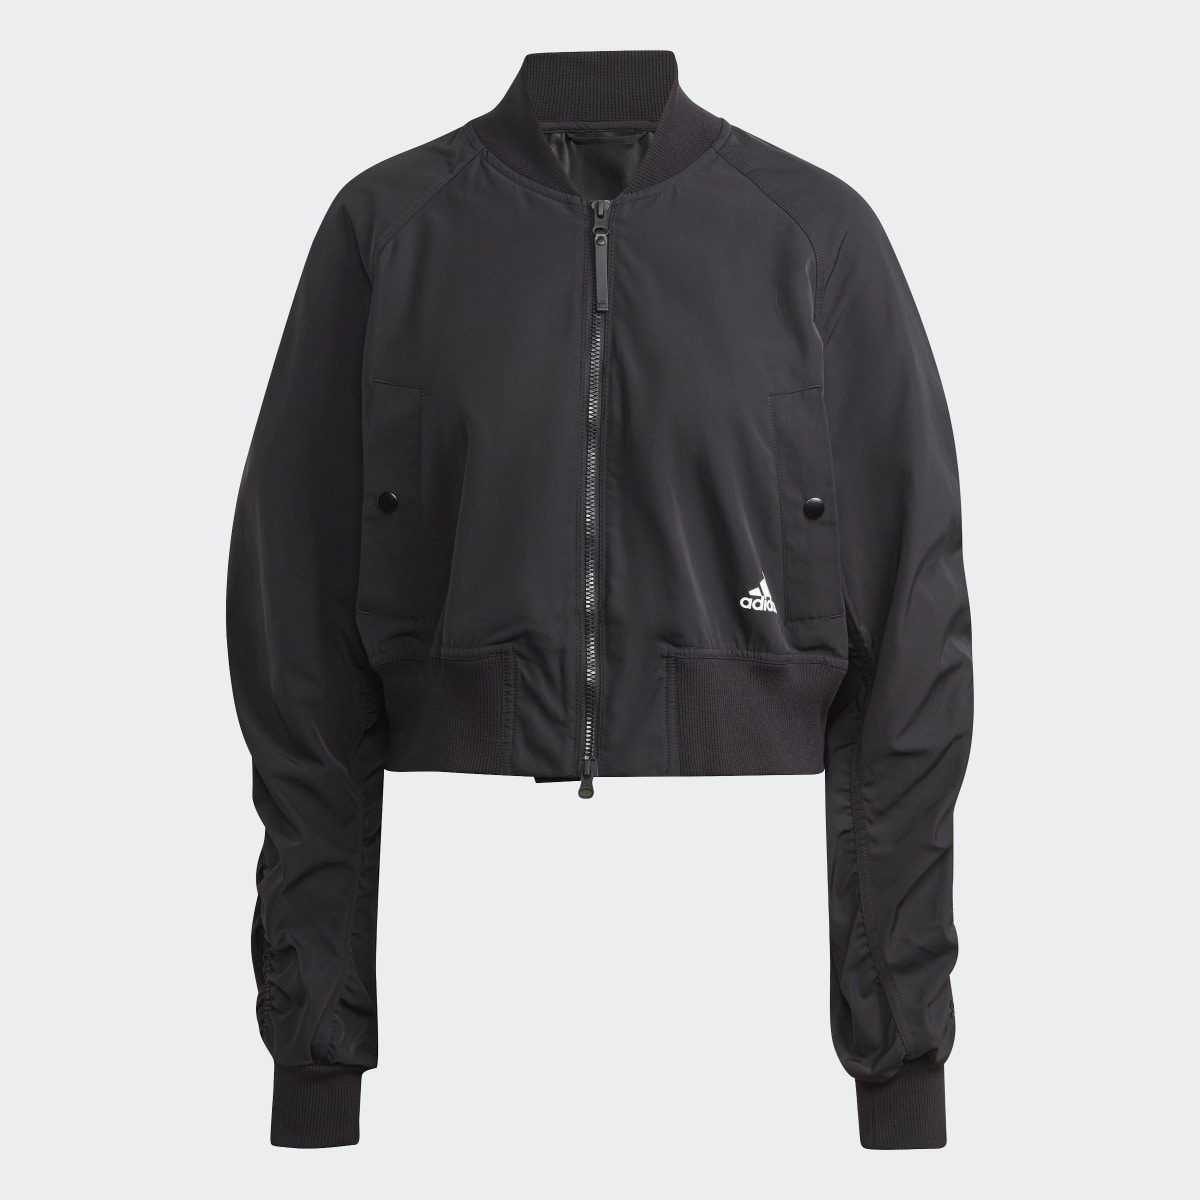 Adidas Collective Power Bomber Jacket. 5